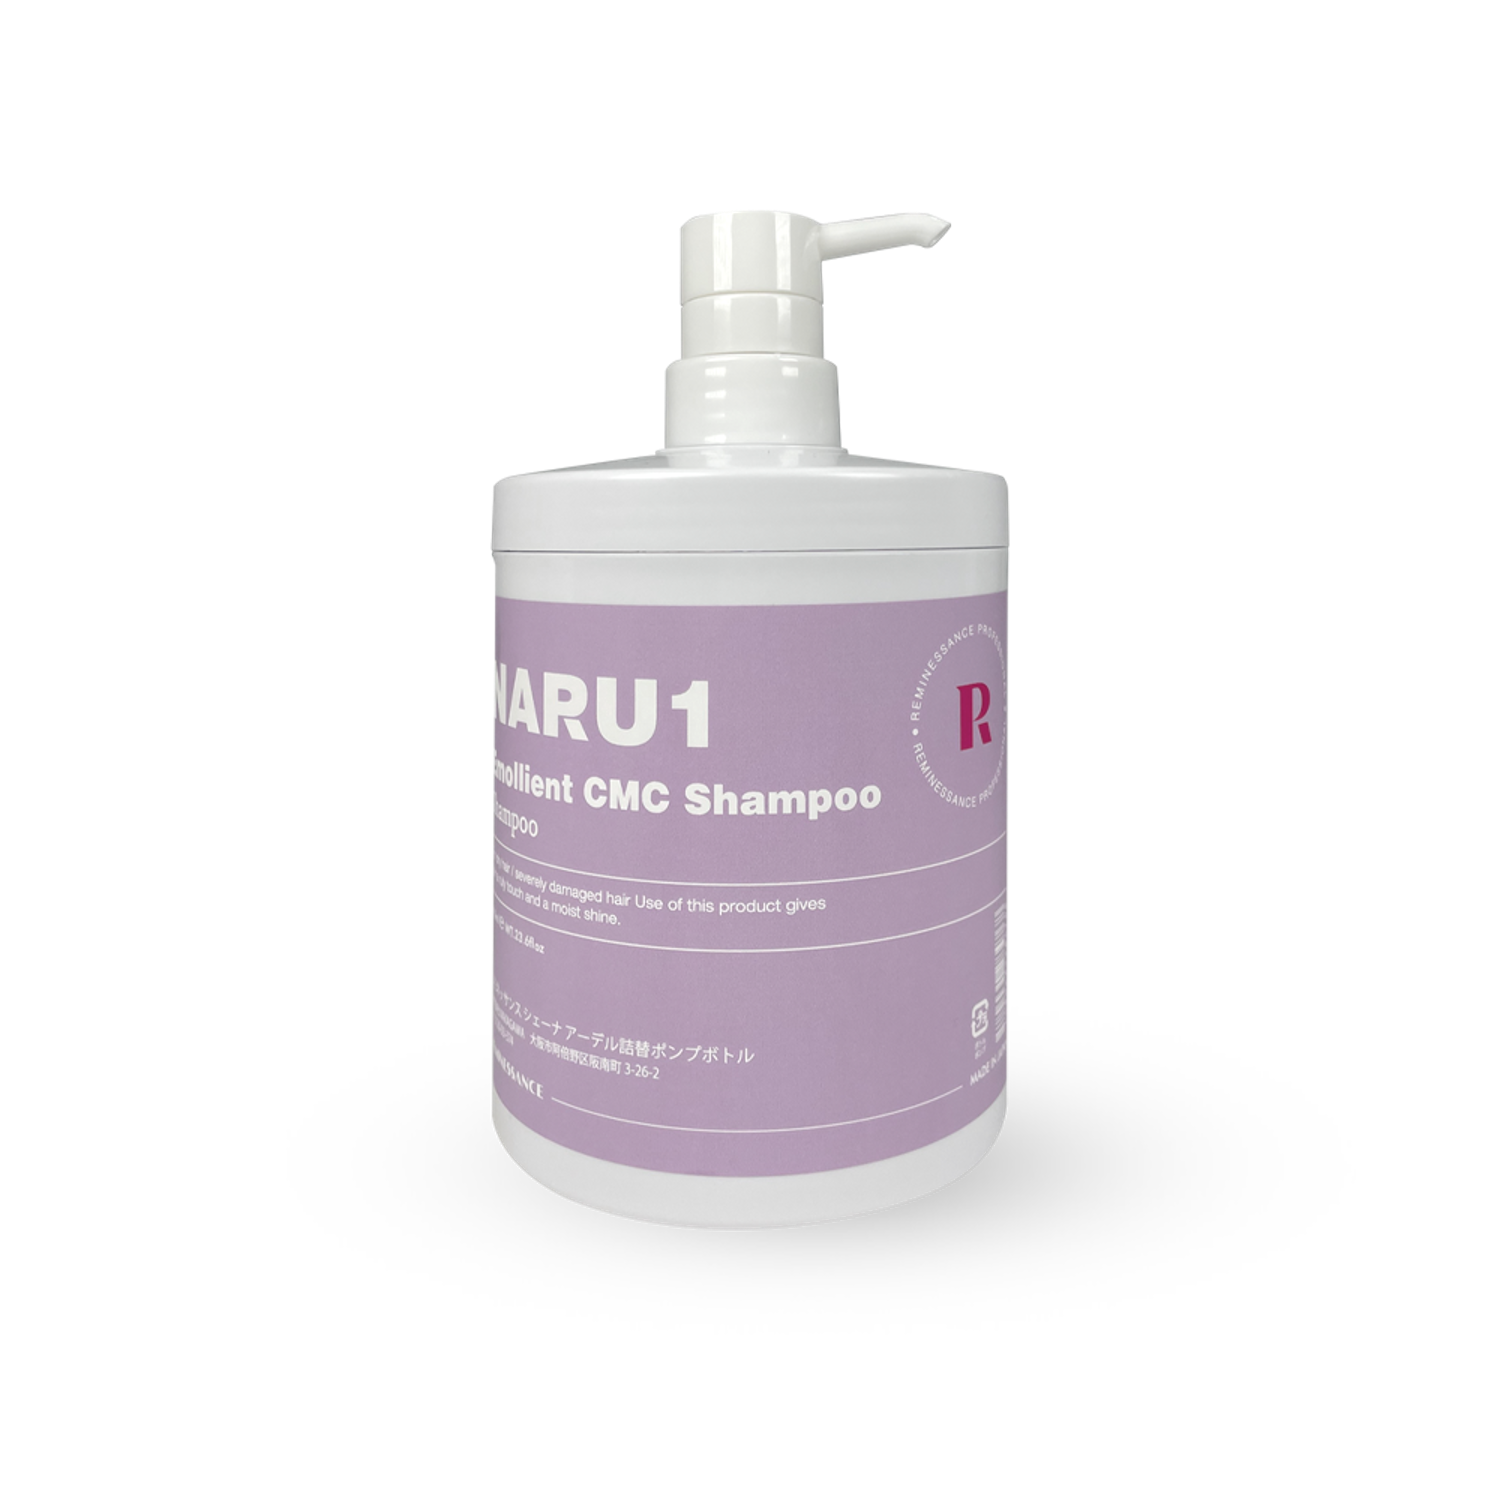 NARU1_Treatment and Refill Container